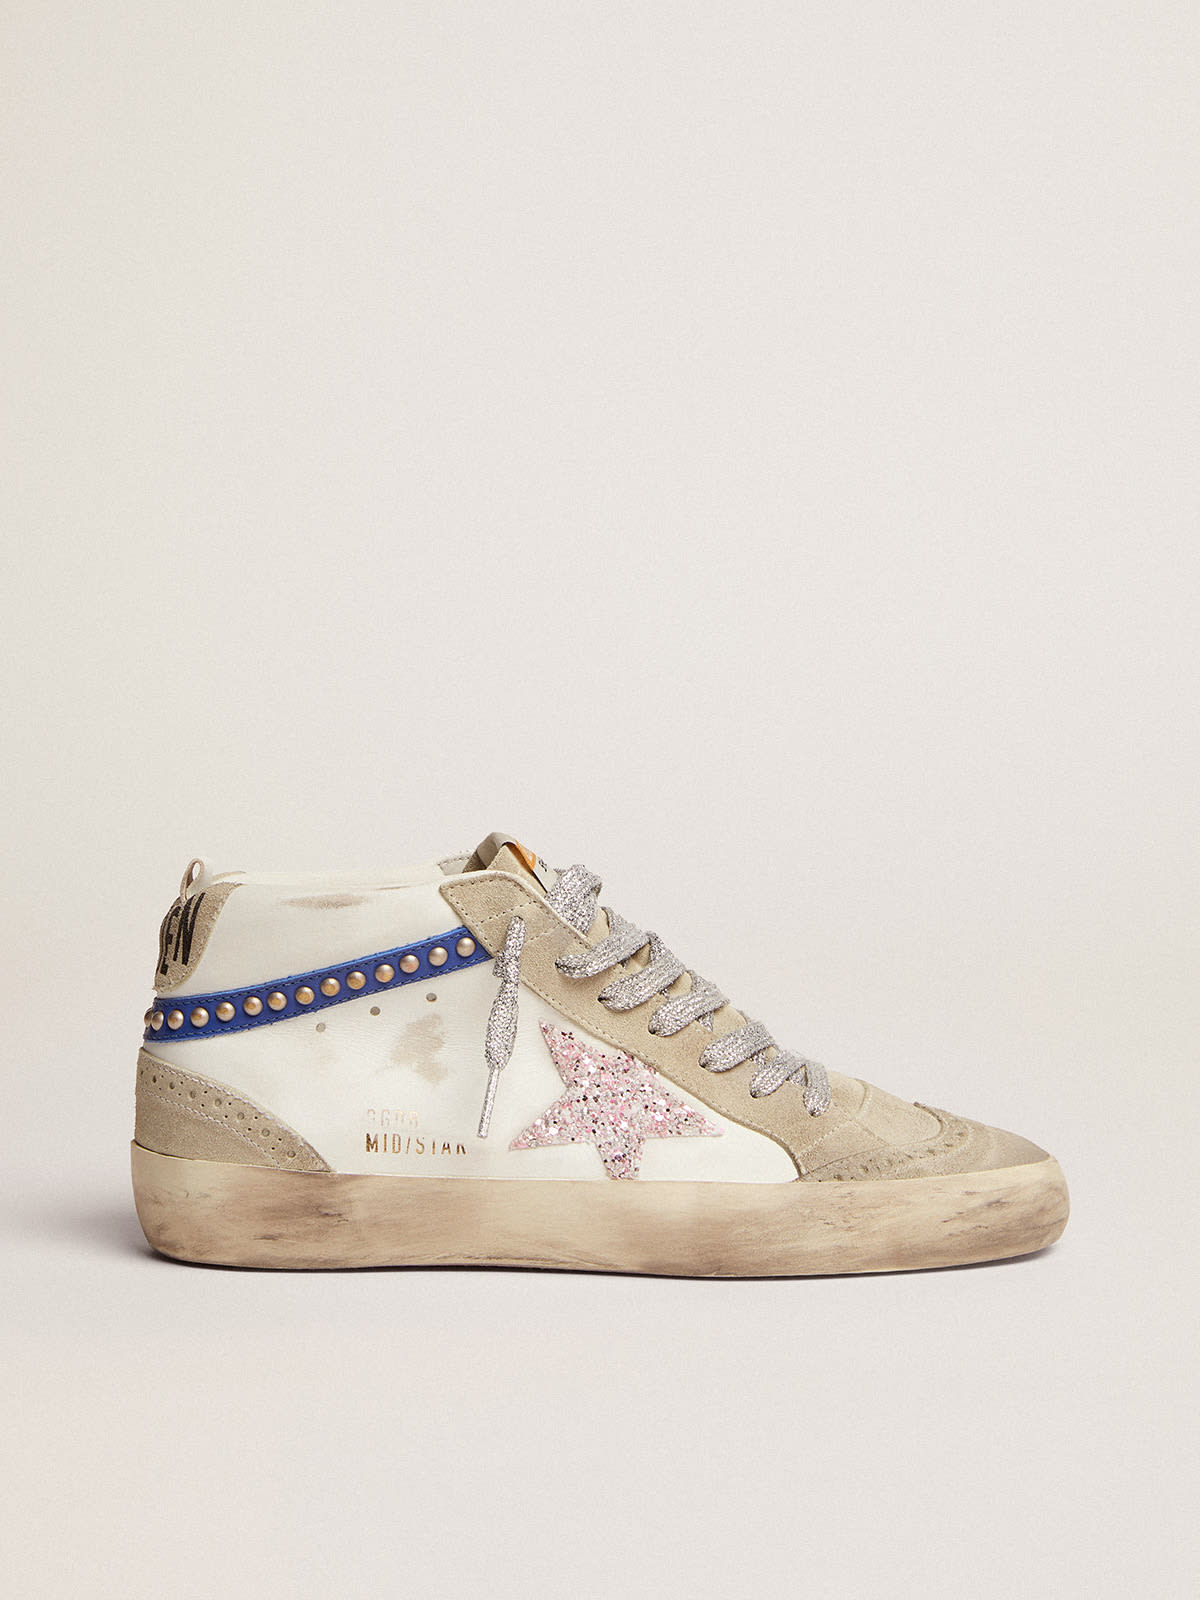 Golden Goose - Mid Star LTD sneakers with white and pink glitter star and blue leather flash with gold-colored studs in 